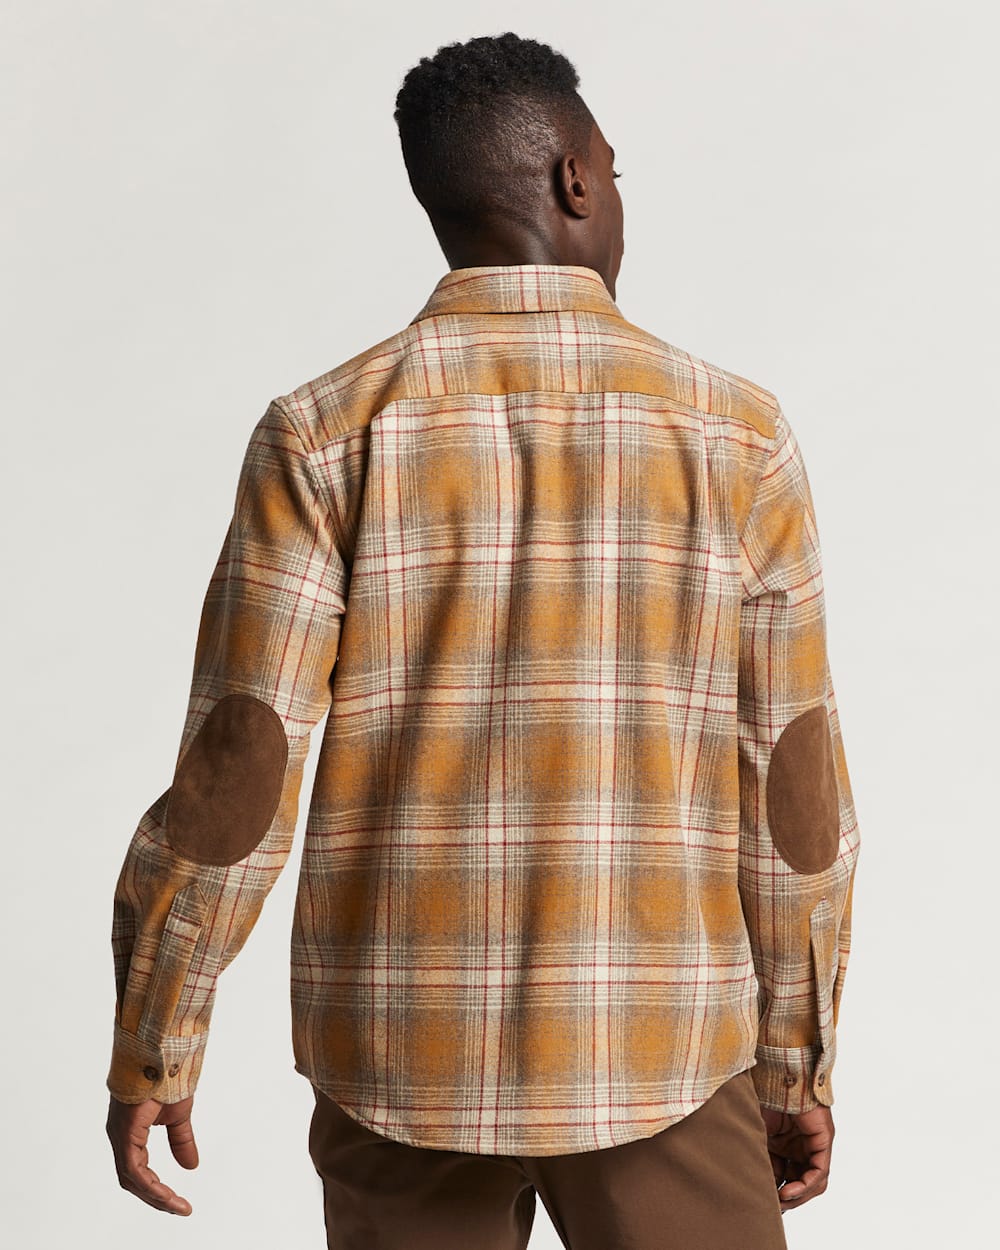 ALTERNATE VIEW OF MEN'S PLAID TRAIL SHIRT IN RED/COPPER PLAID image number 3